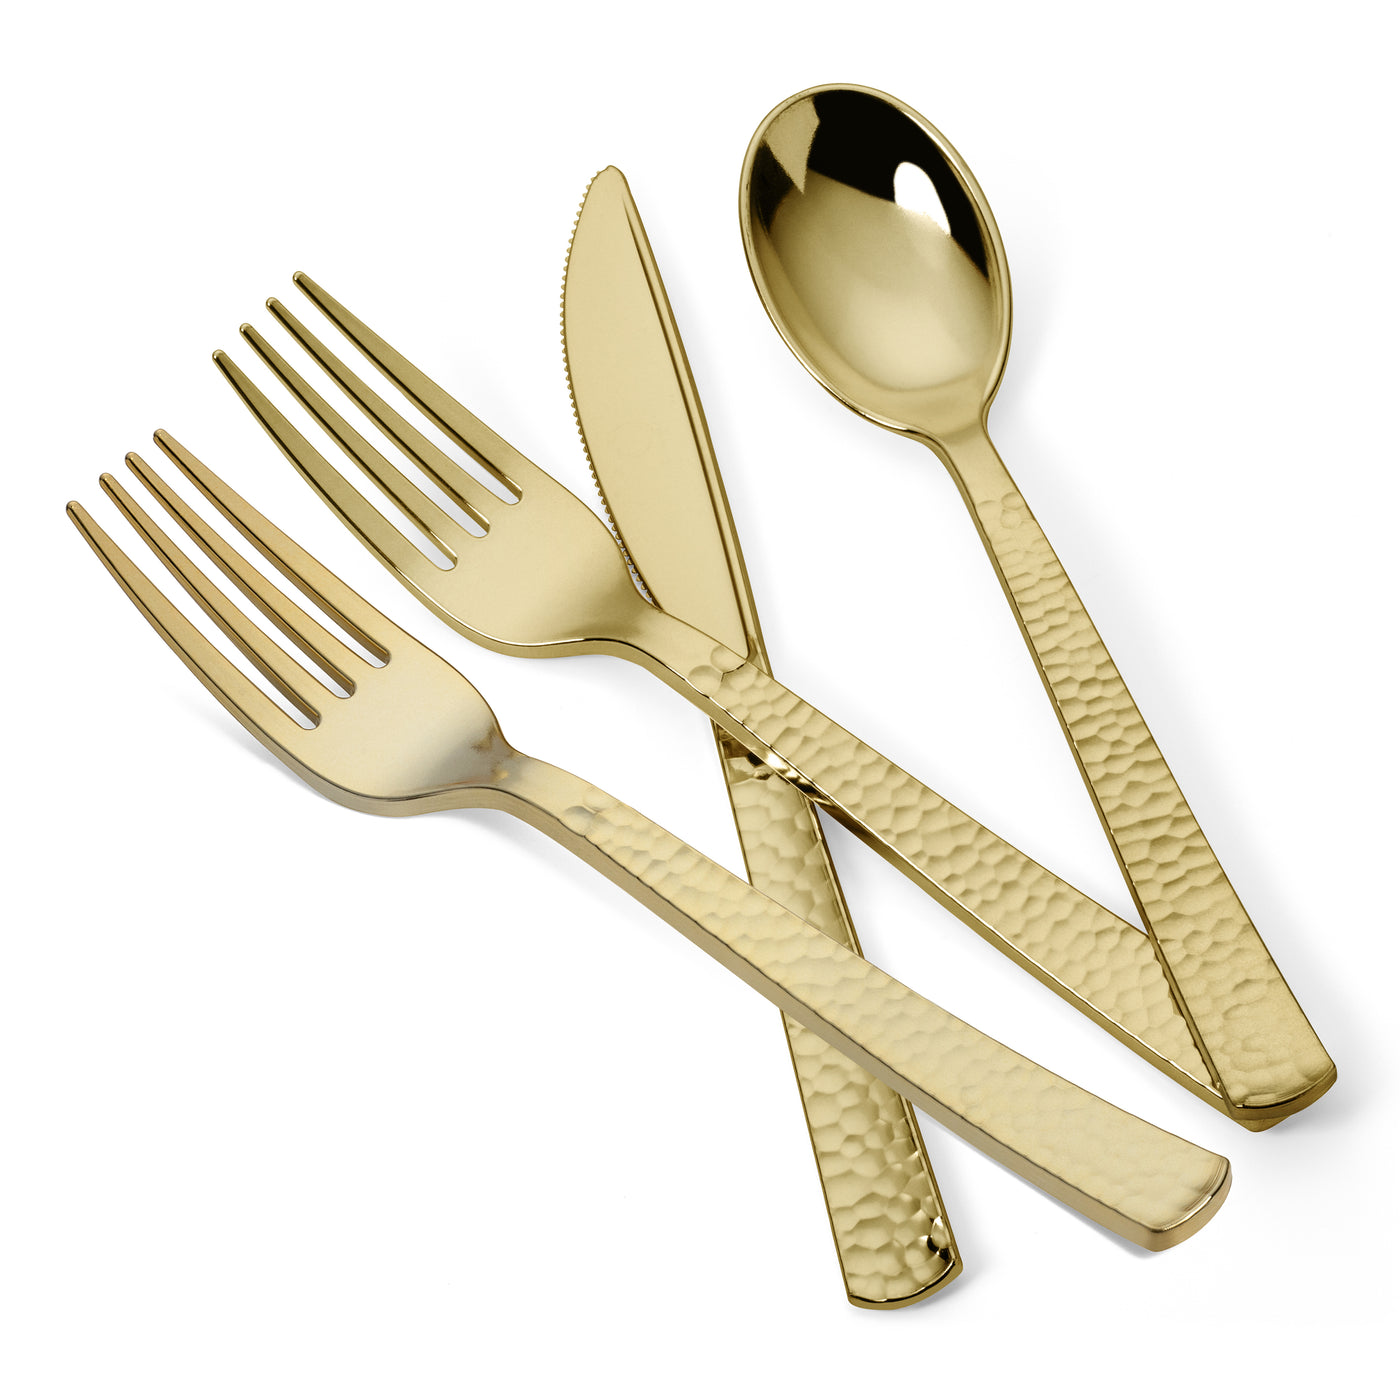 300 Pieces Gold Plastic Disposable Cutlery Set - Metallic Plastic with a Hammered Finish - 75 Spoons, 75 Knives, 150 Forks - Perfect Settings Tableware